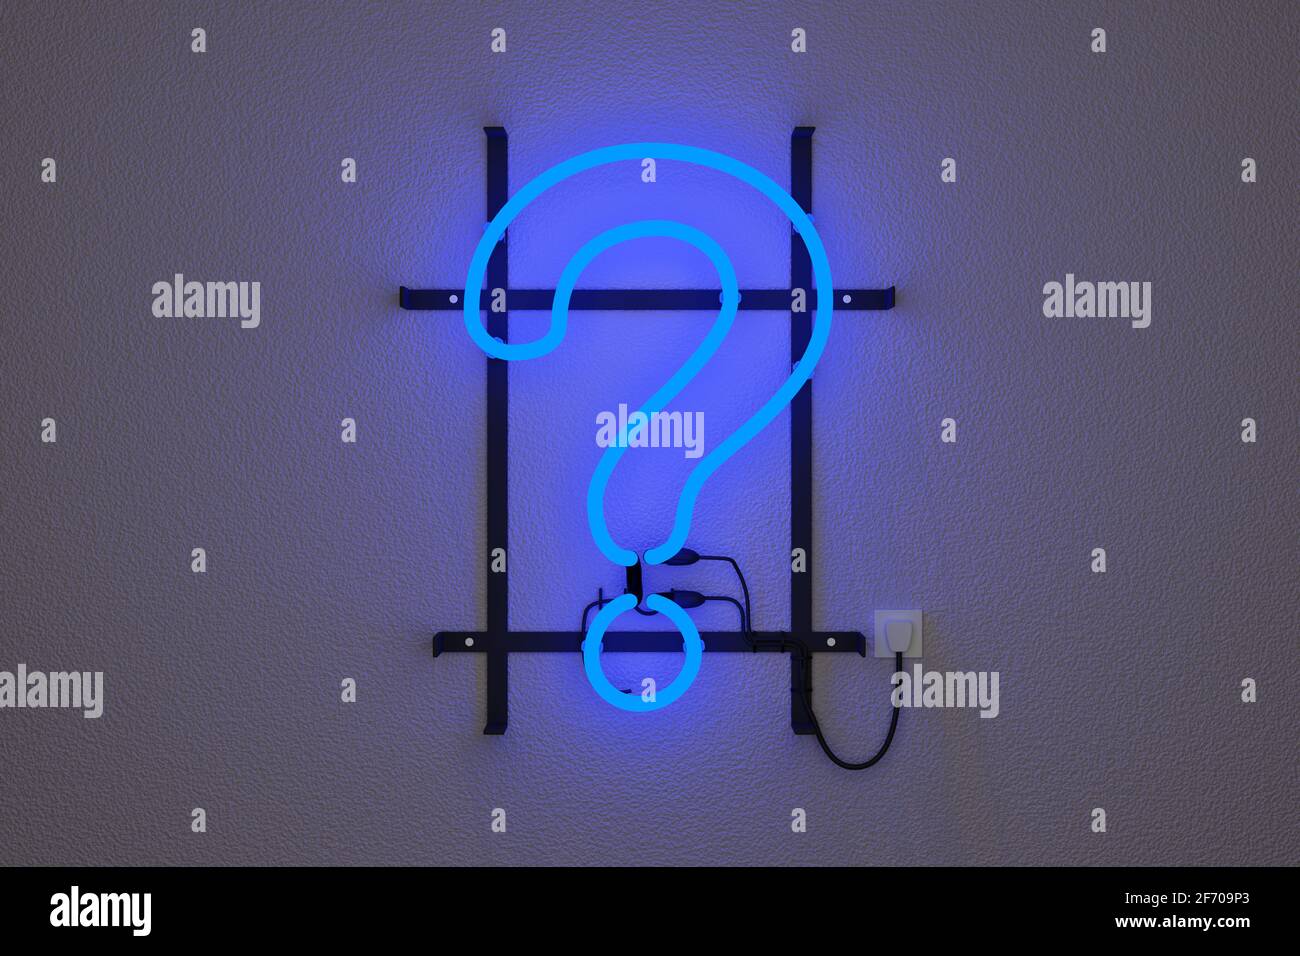 Realistic neon light in the shape of a question mark. 3d illustration. Stock Photo